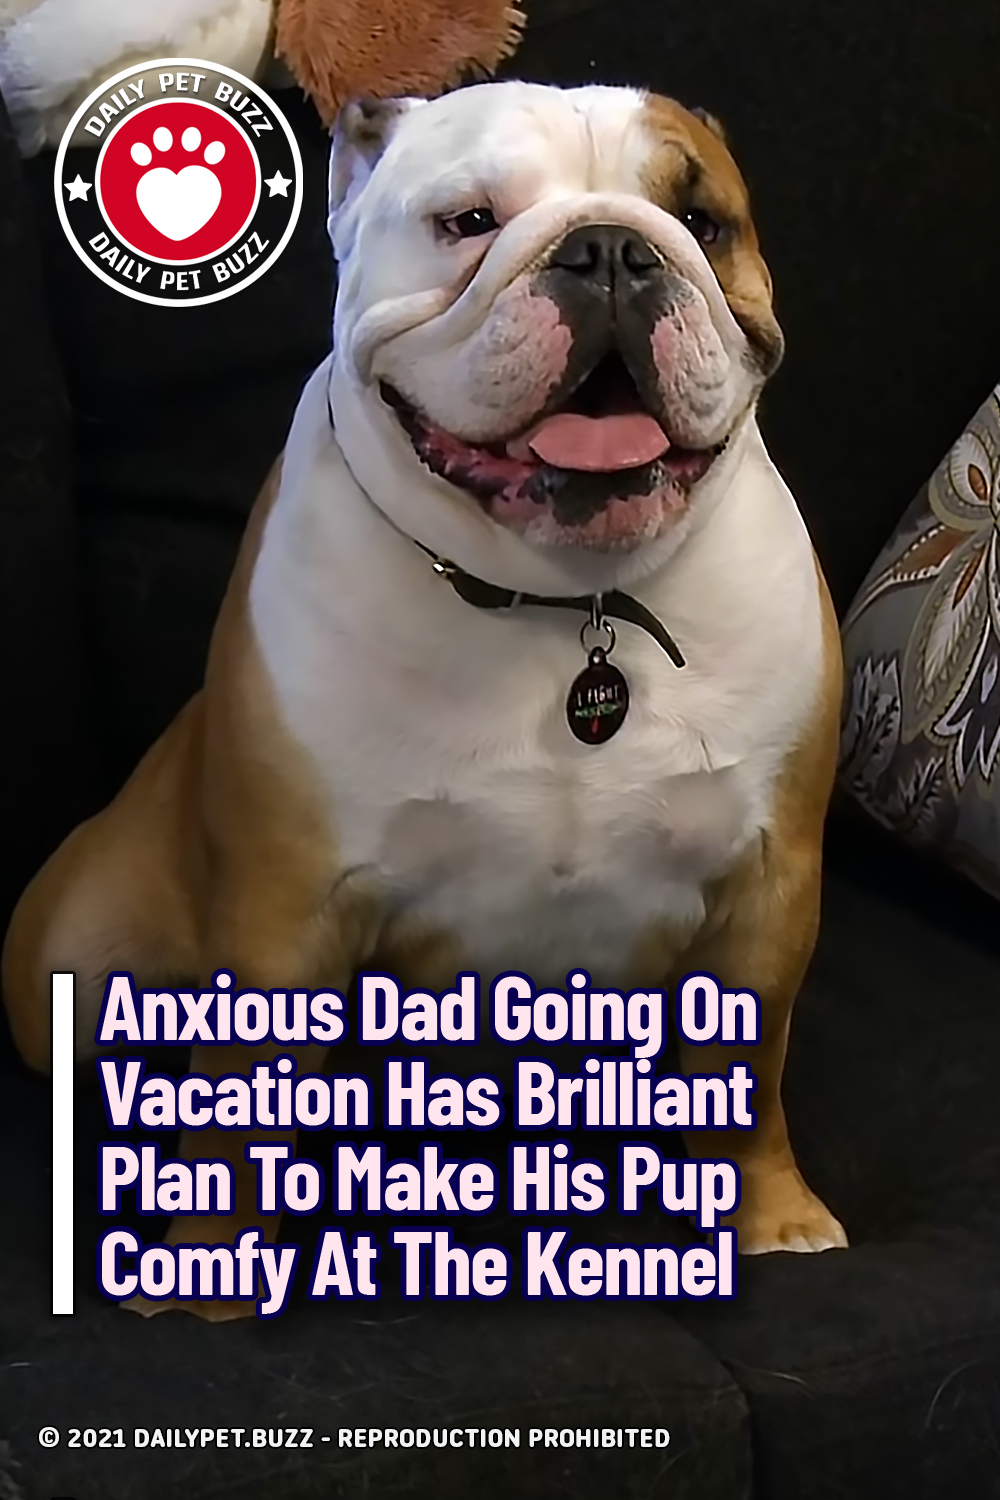 Anxious Dad Going On Vacation Has Brilliant Plan To Make His Pup Comfy At The Kennel